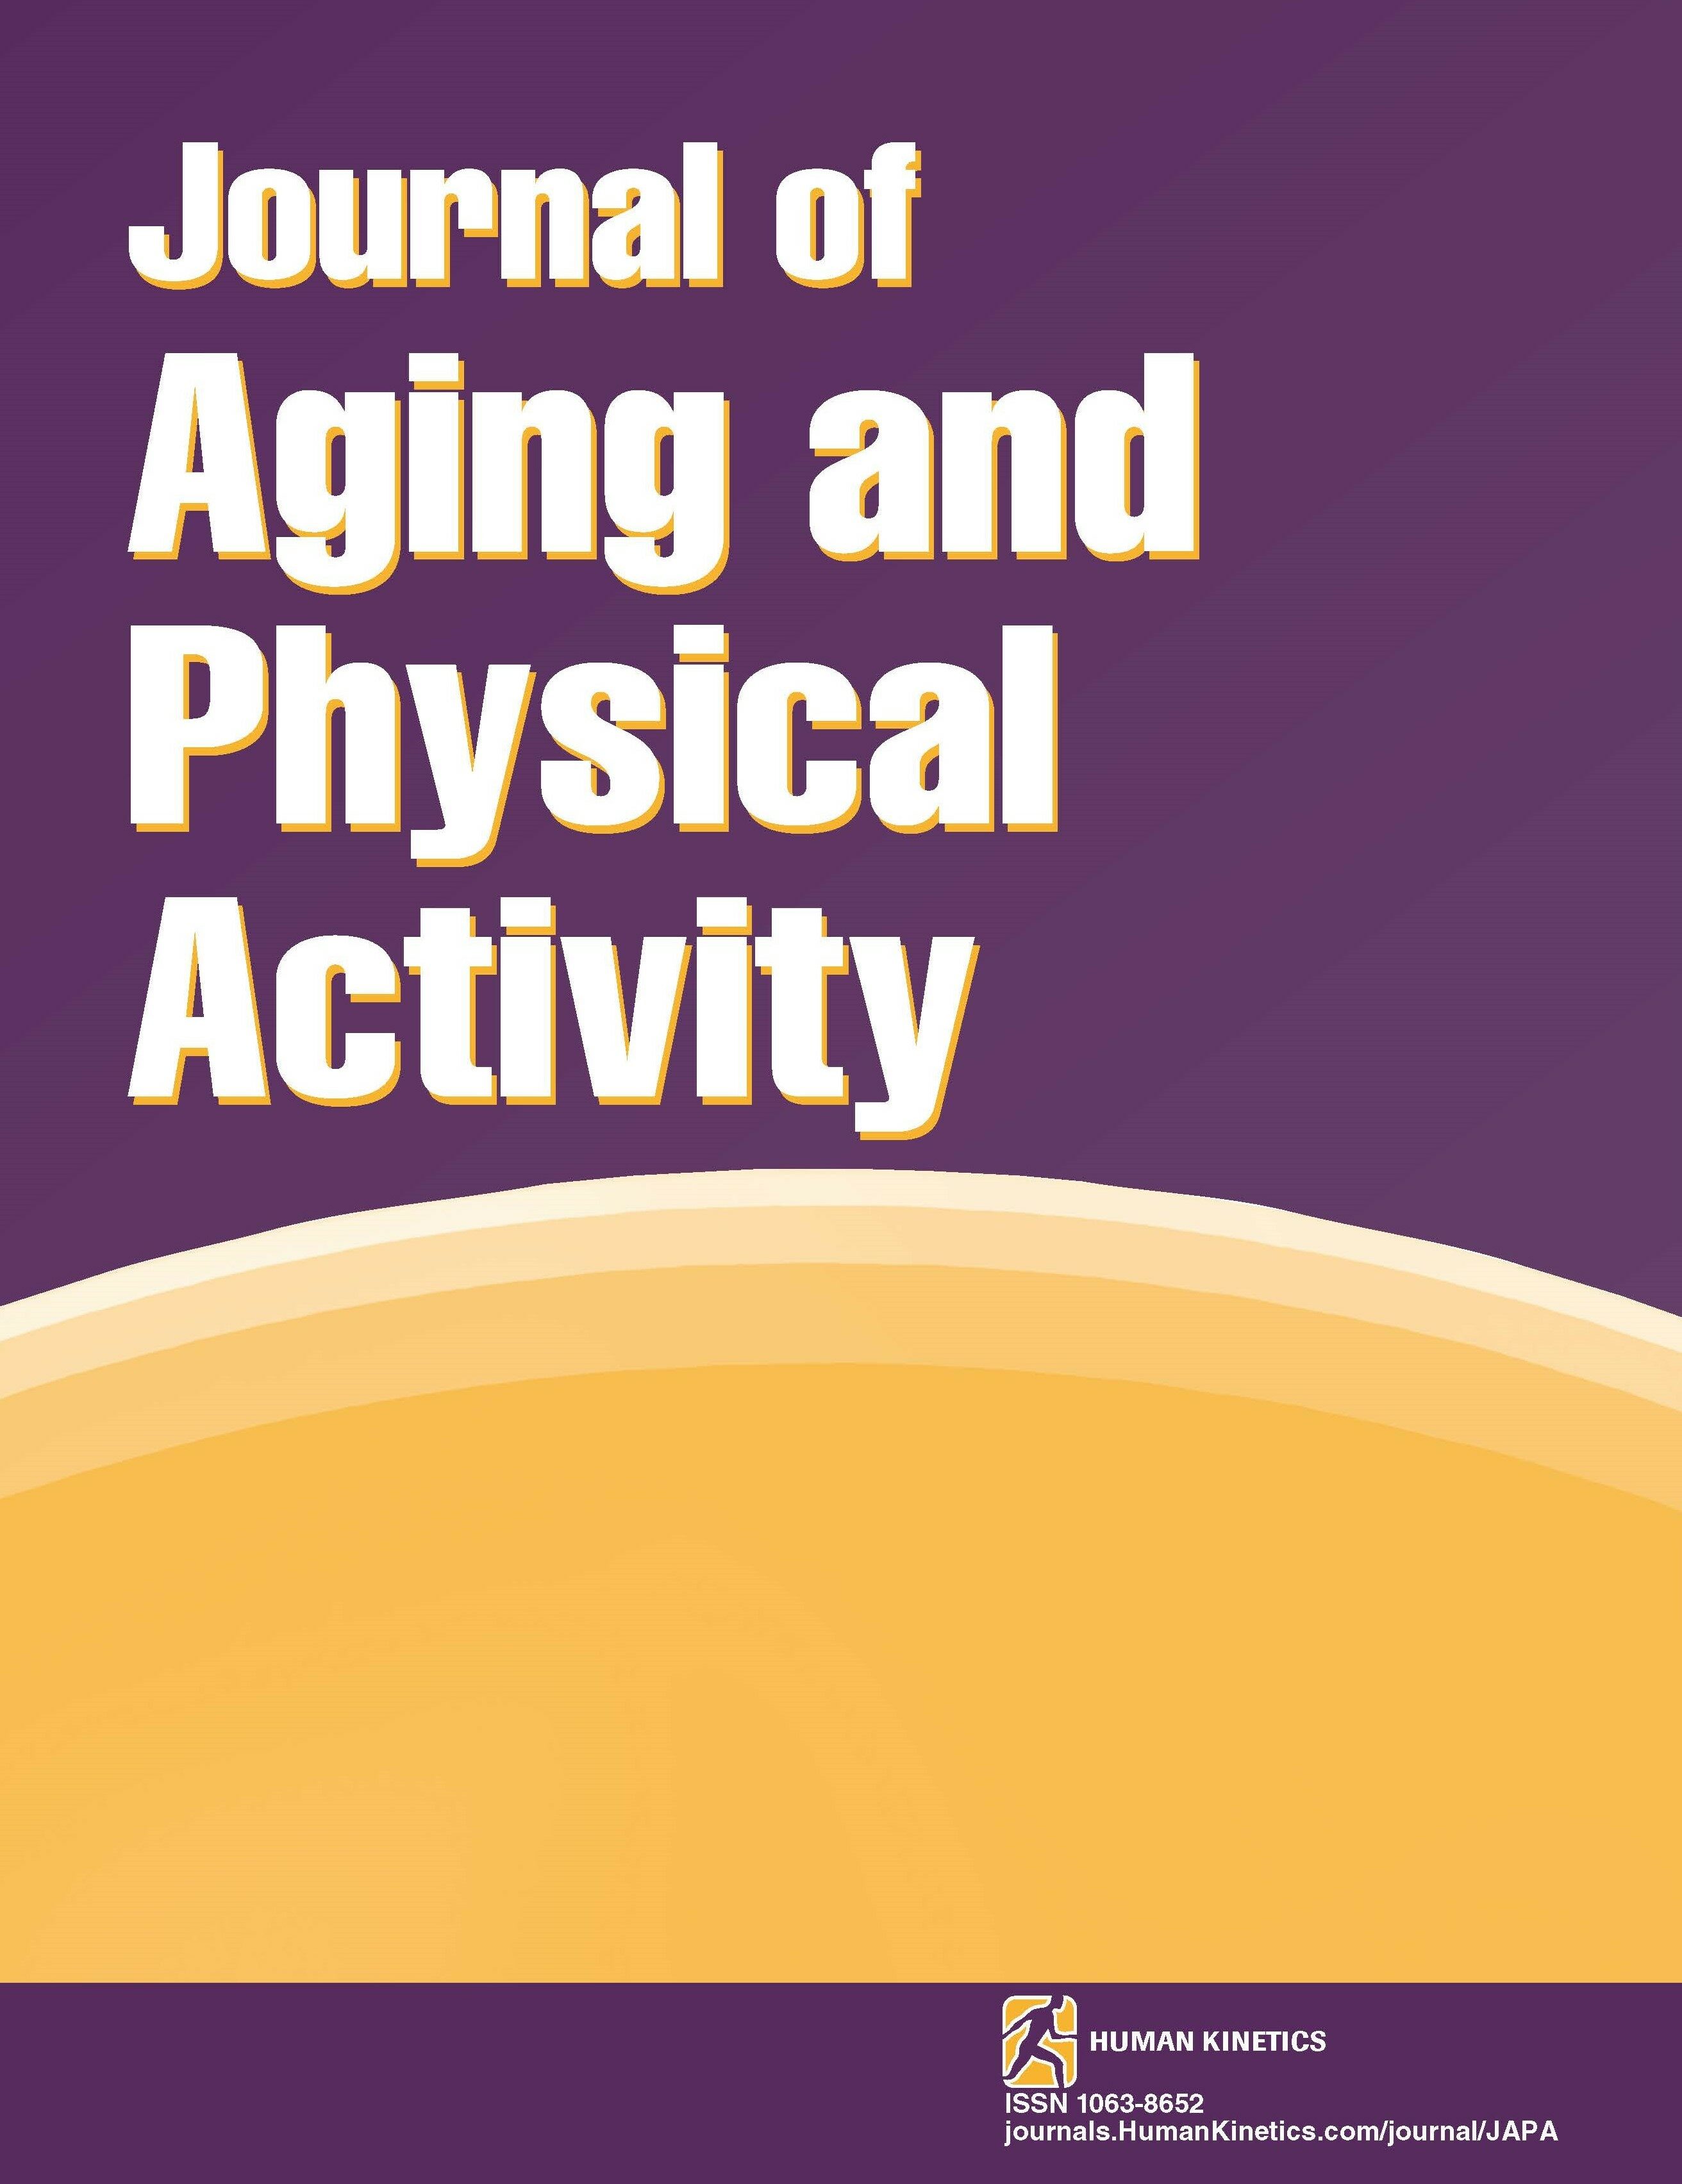 Sedentary Behavior, Physical Activity, Social Participation, and Loneliness Among Community-Dwelling Older Adults in China